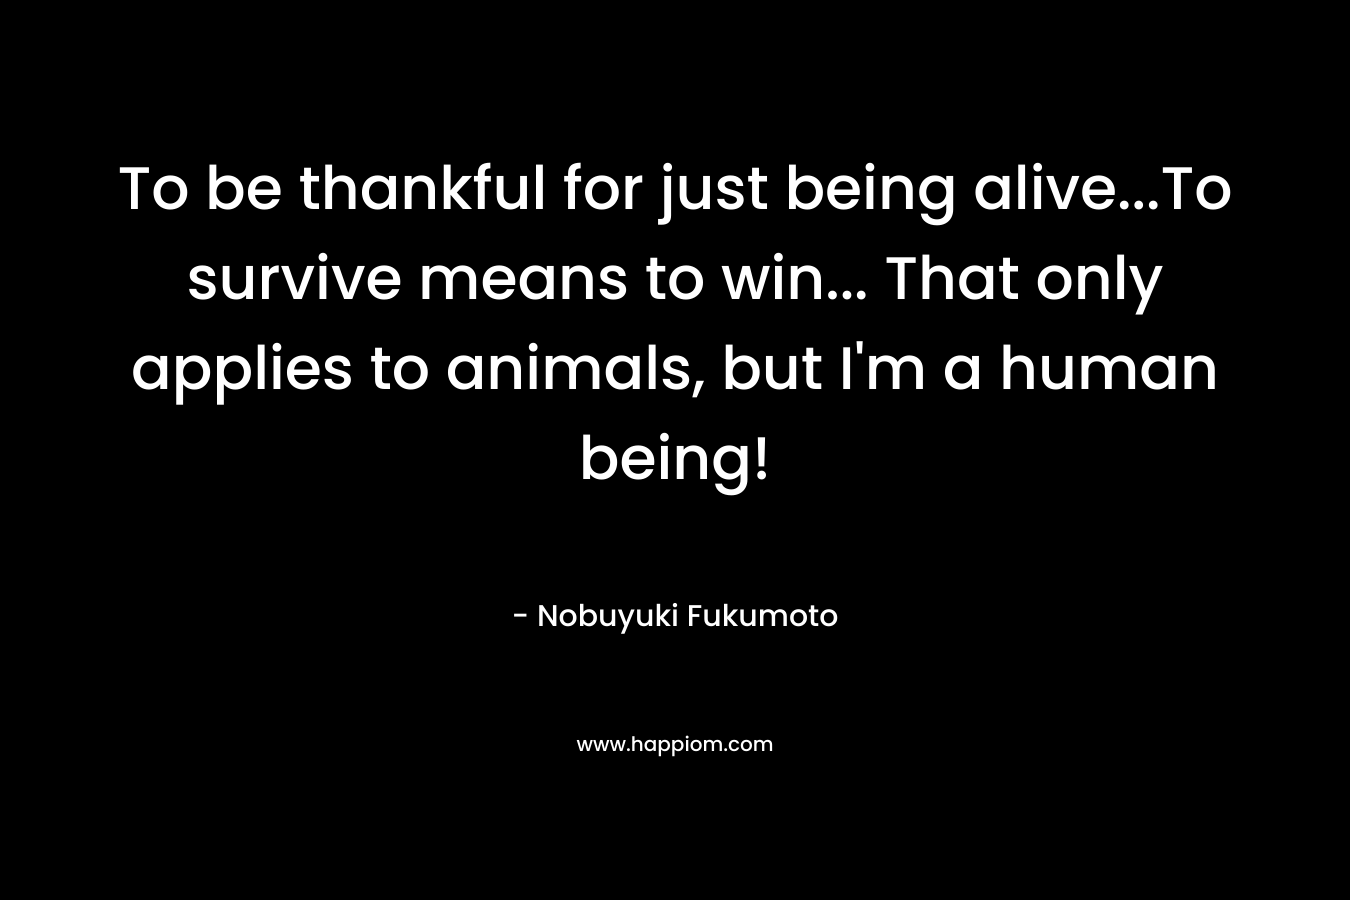 To be thankful for just being alive…To survive means to win… That only applies to animals, but I’m a human being! – Nobuyuki Fukumoto